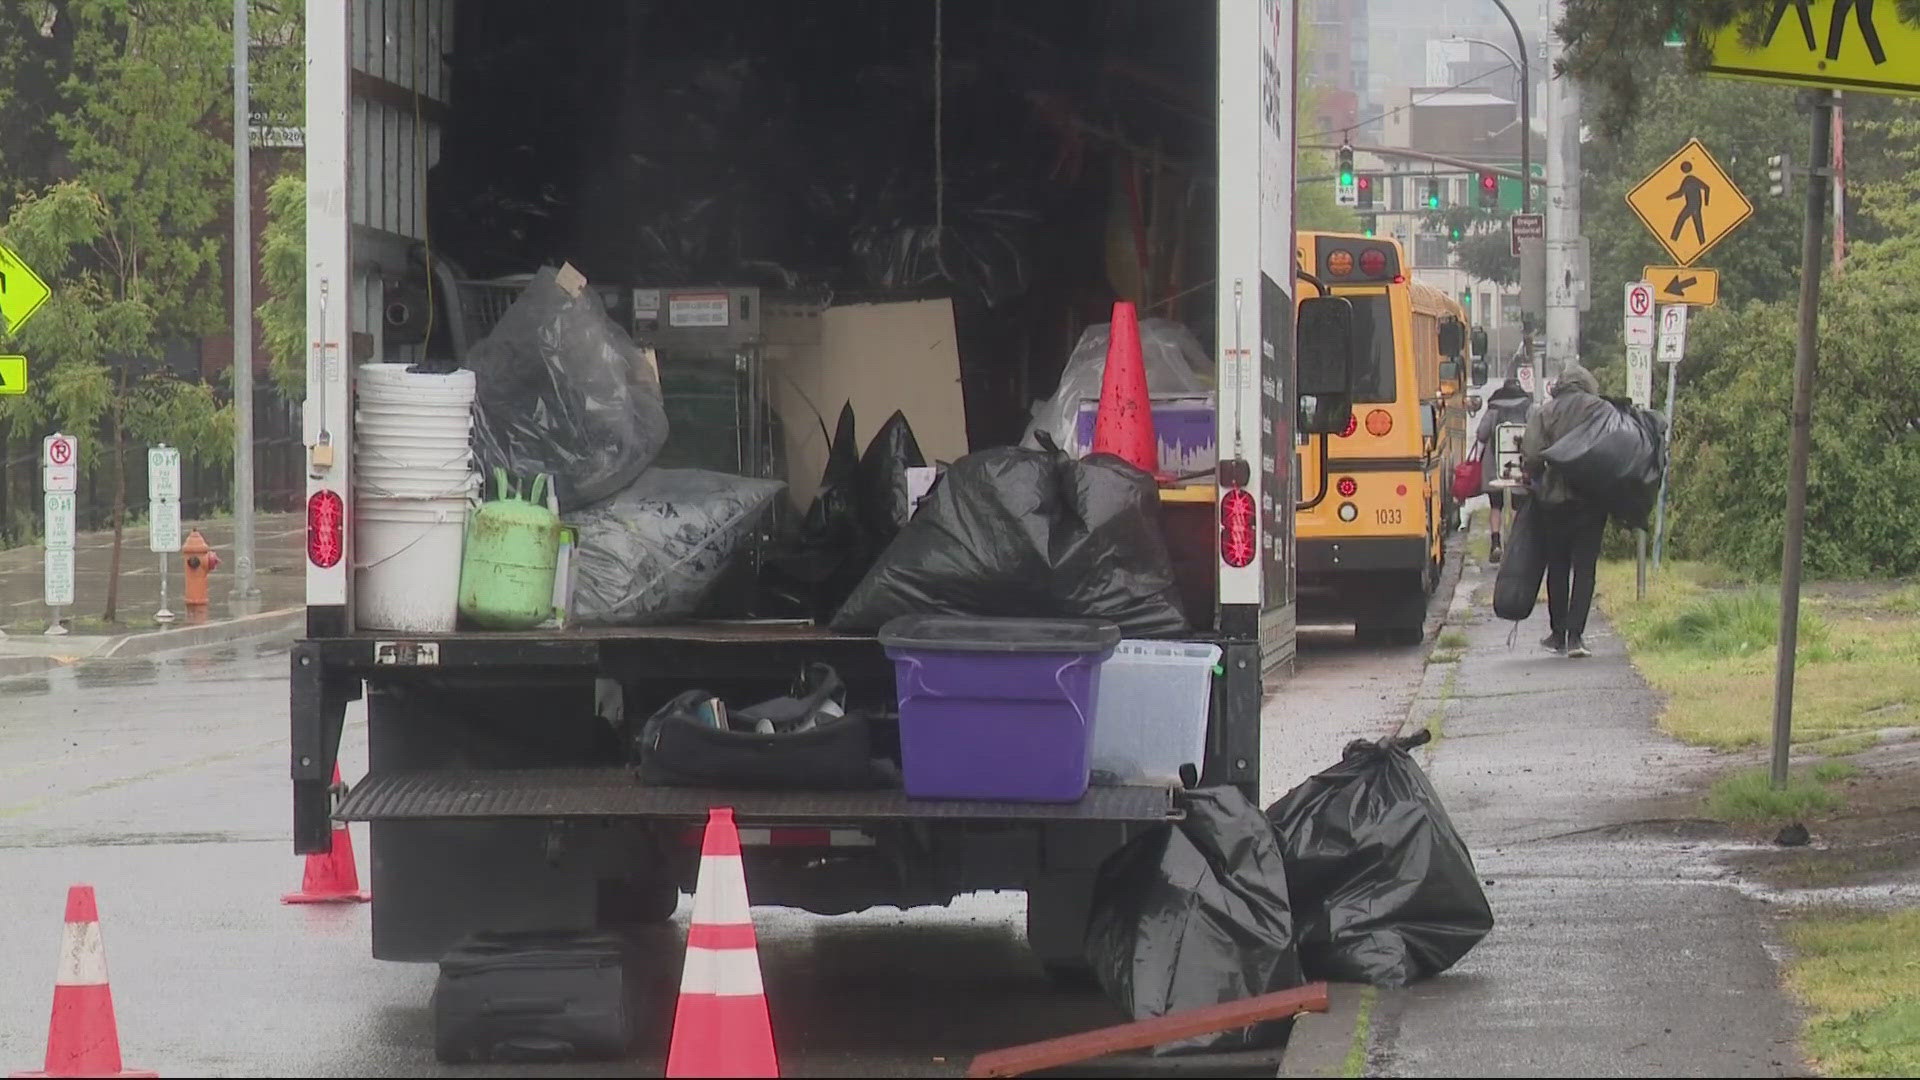 A volunteer group of outreach workers have said Portland’s camp removals are making it more difficult to get people into shelters.